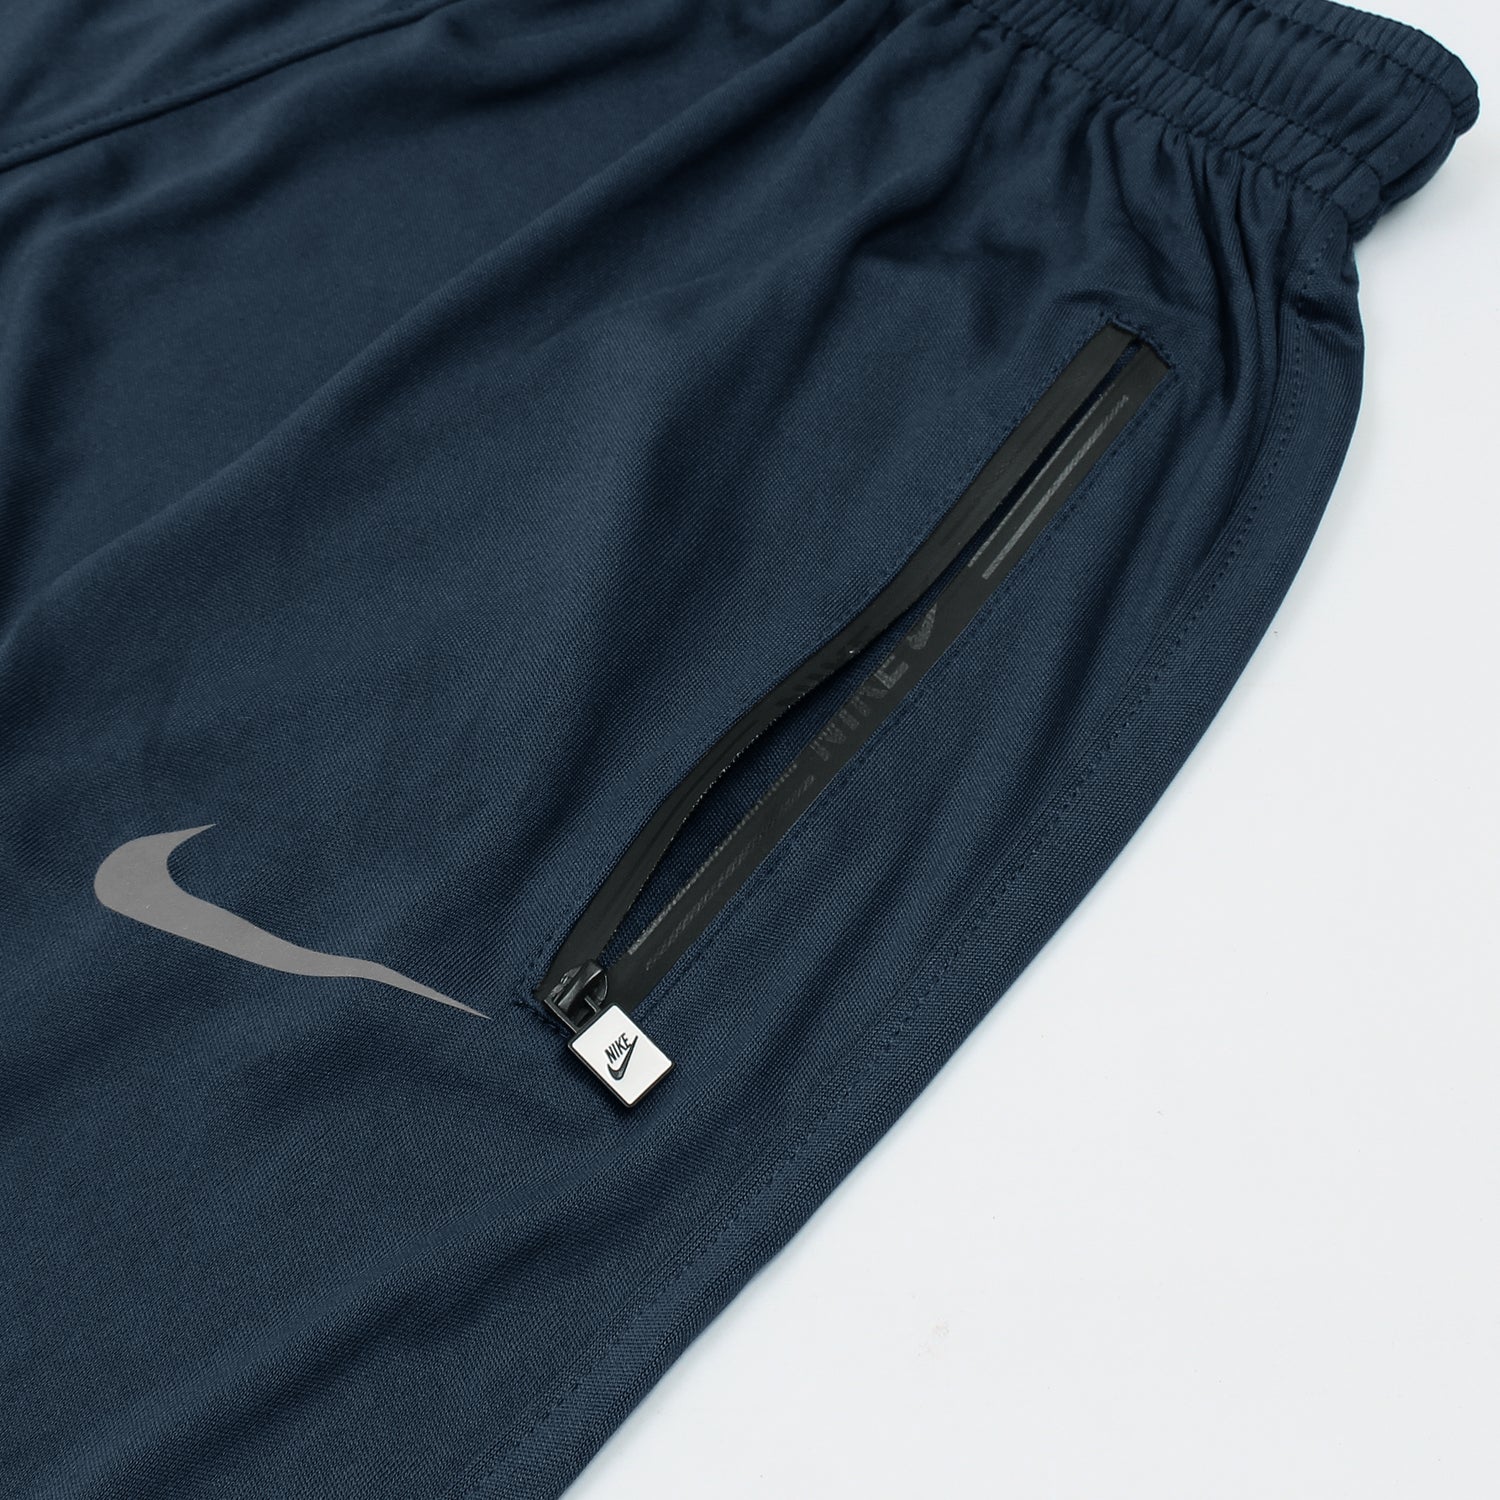 Nike Men's Dri-FIT Totality Fitness Pants | Academy